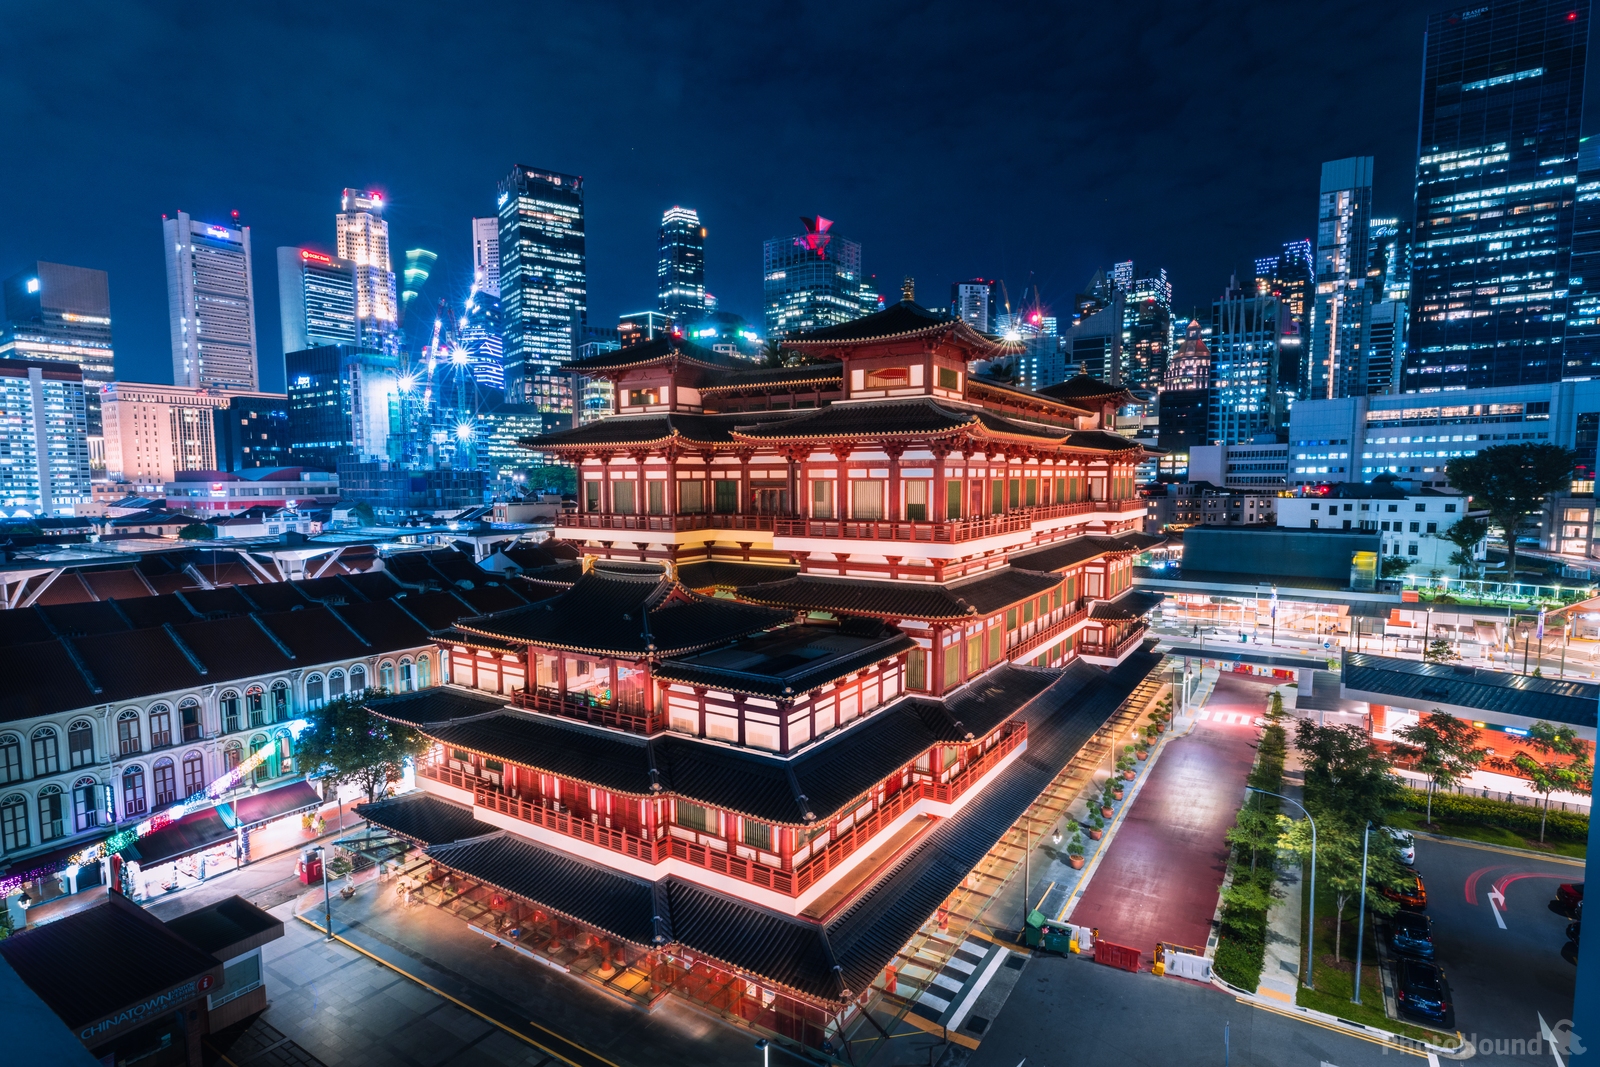 Image of Buddha Tooth Relic Temple - Elevated Viewpoint by Mikestravelbook mikestravelbook@gmail.com